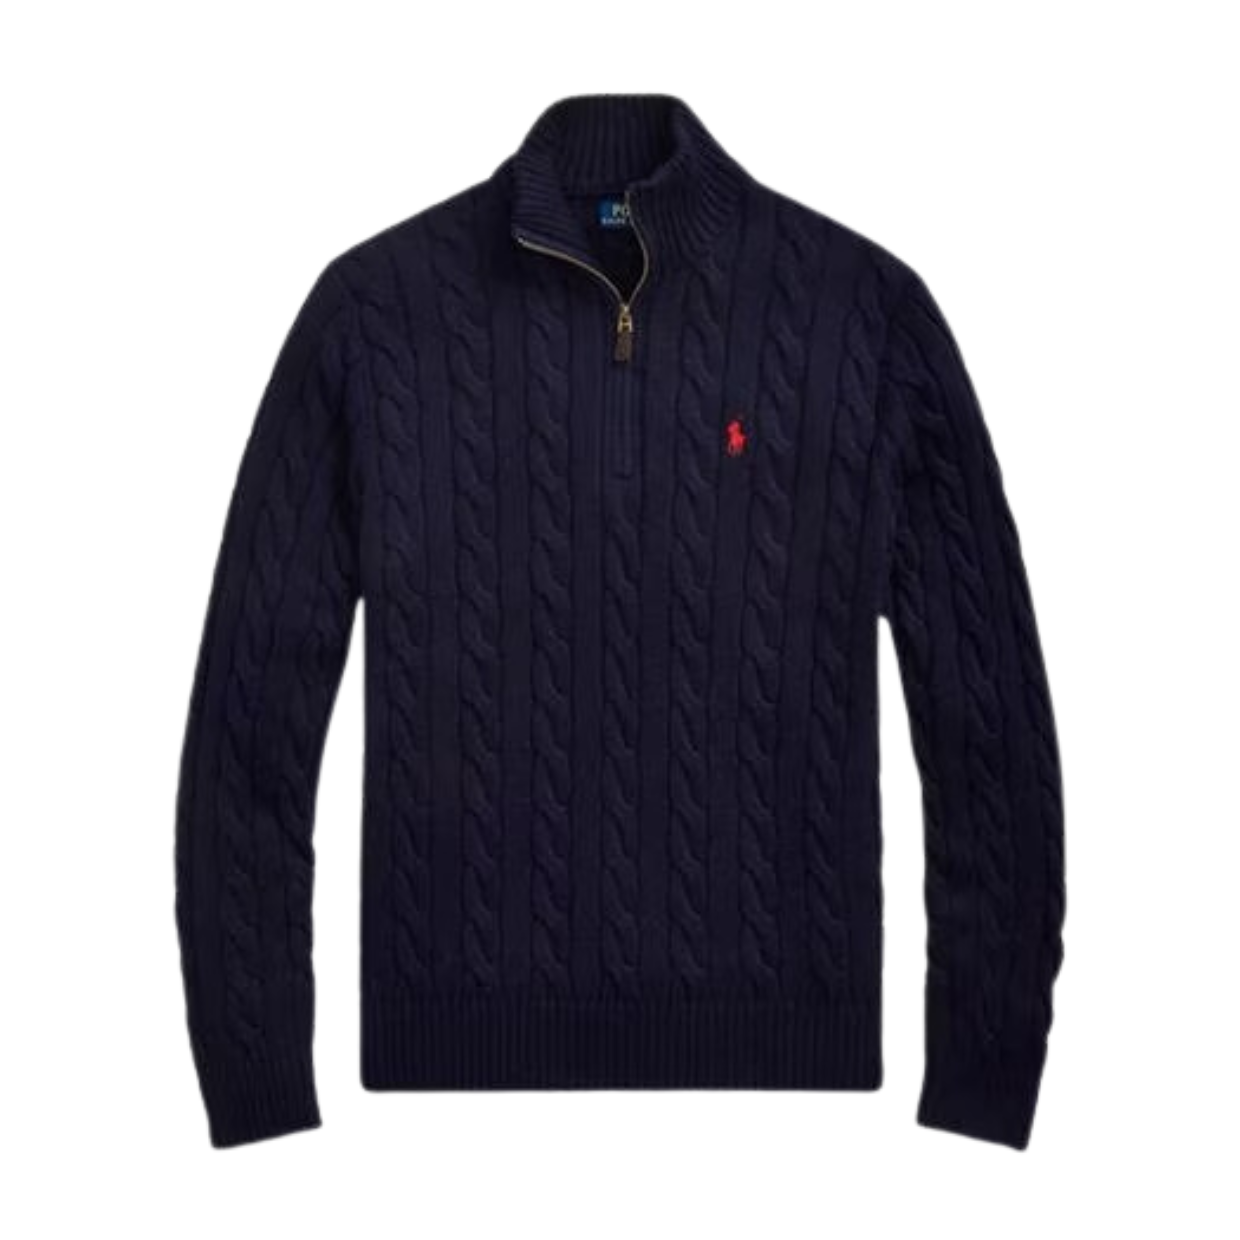 Polo Ralph Lauren Navy Cable Knit Sweater